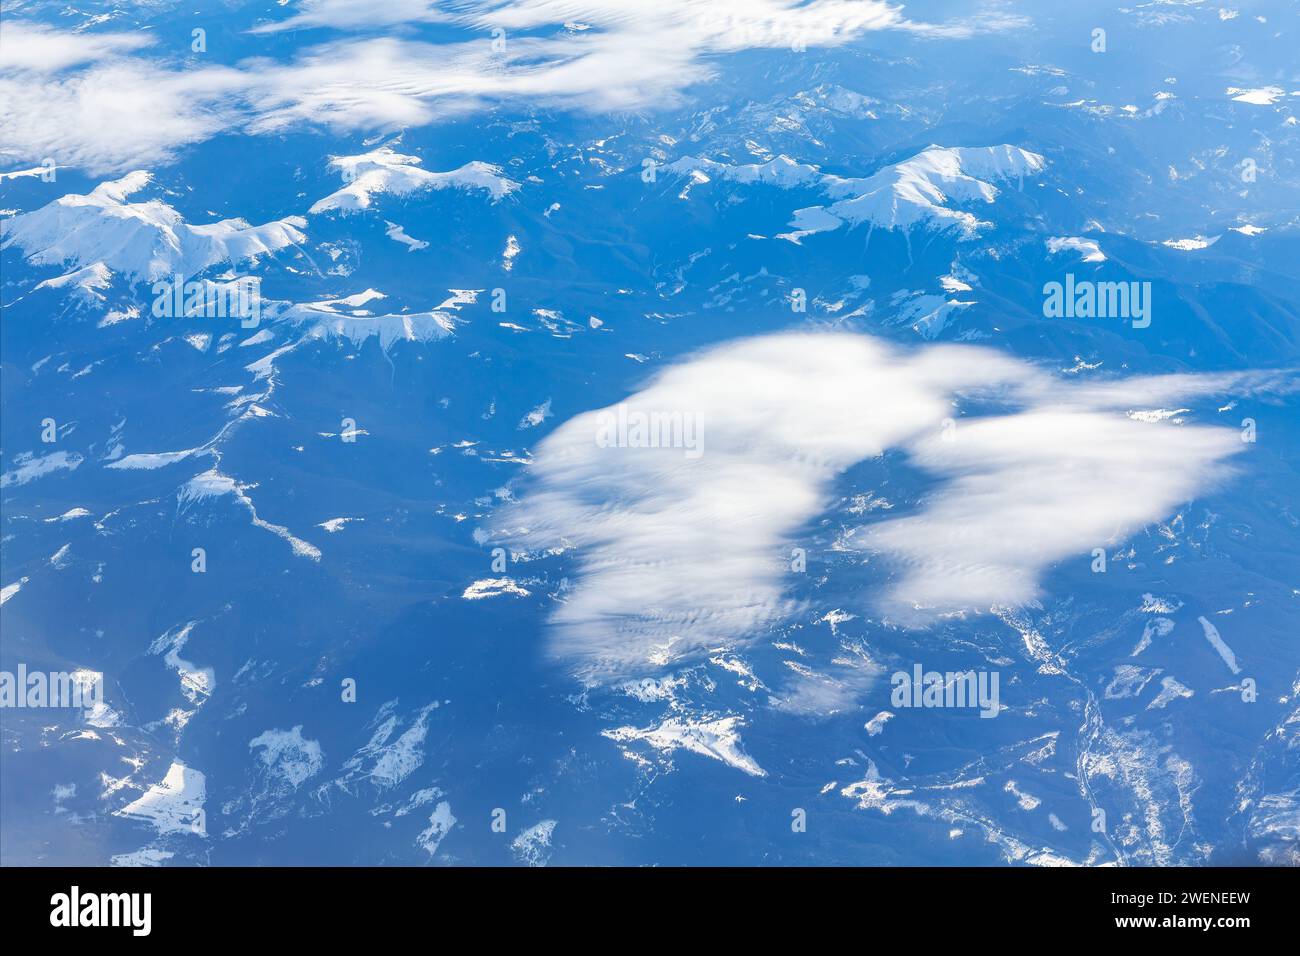 Clouds in the blue sky with snowy peaks as seen through window of an aircraft Stock Photo